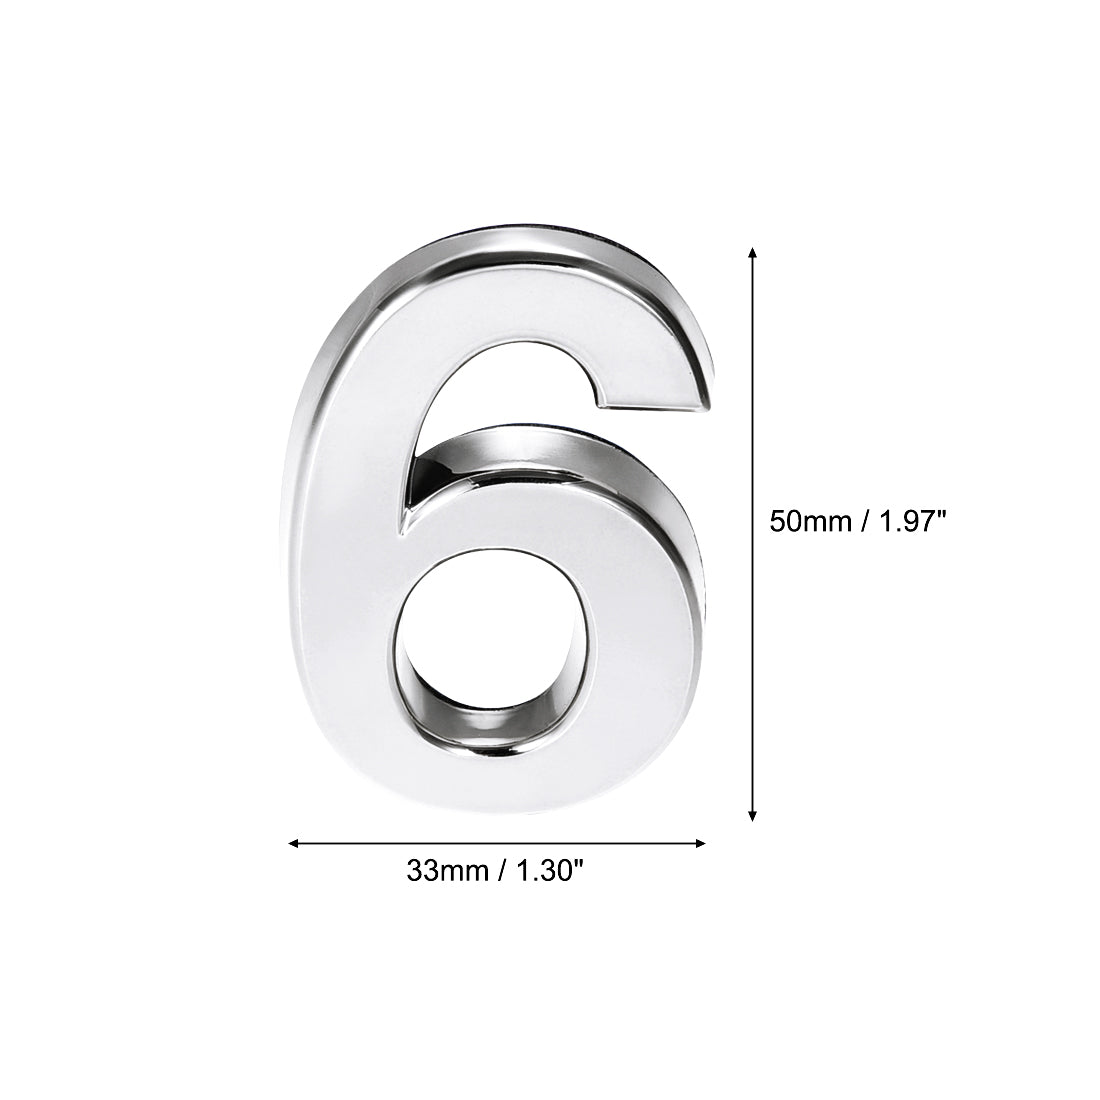 Uxcell Uxcell Self Adhesive House Number 1.97 Inch ABS Plastic Number 4 for House Hotel Mailbox Address Sign Silver Tone